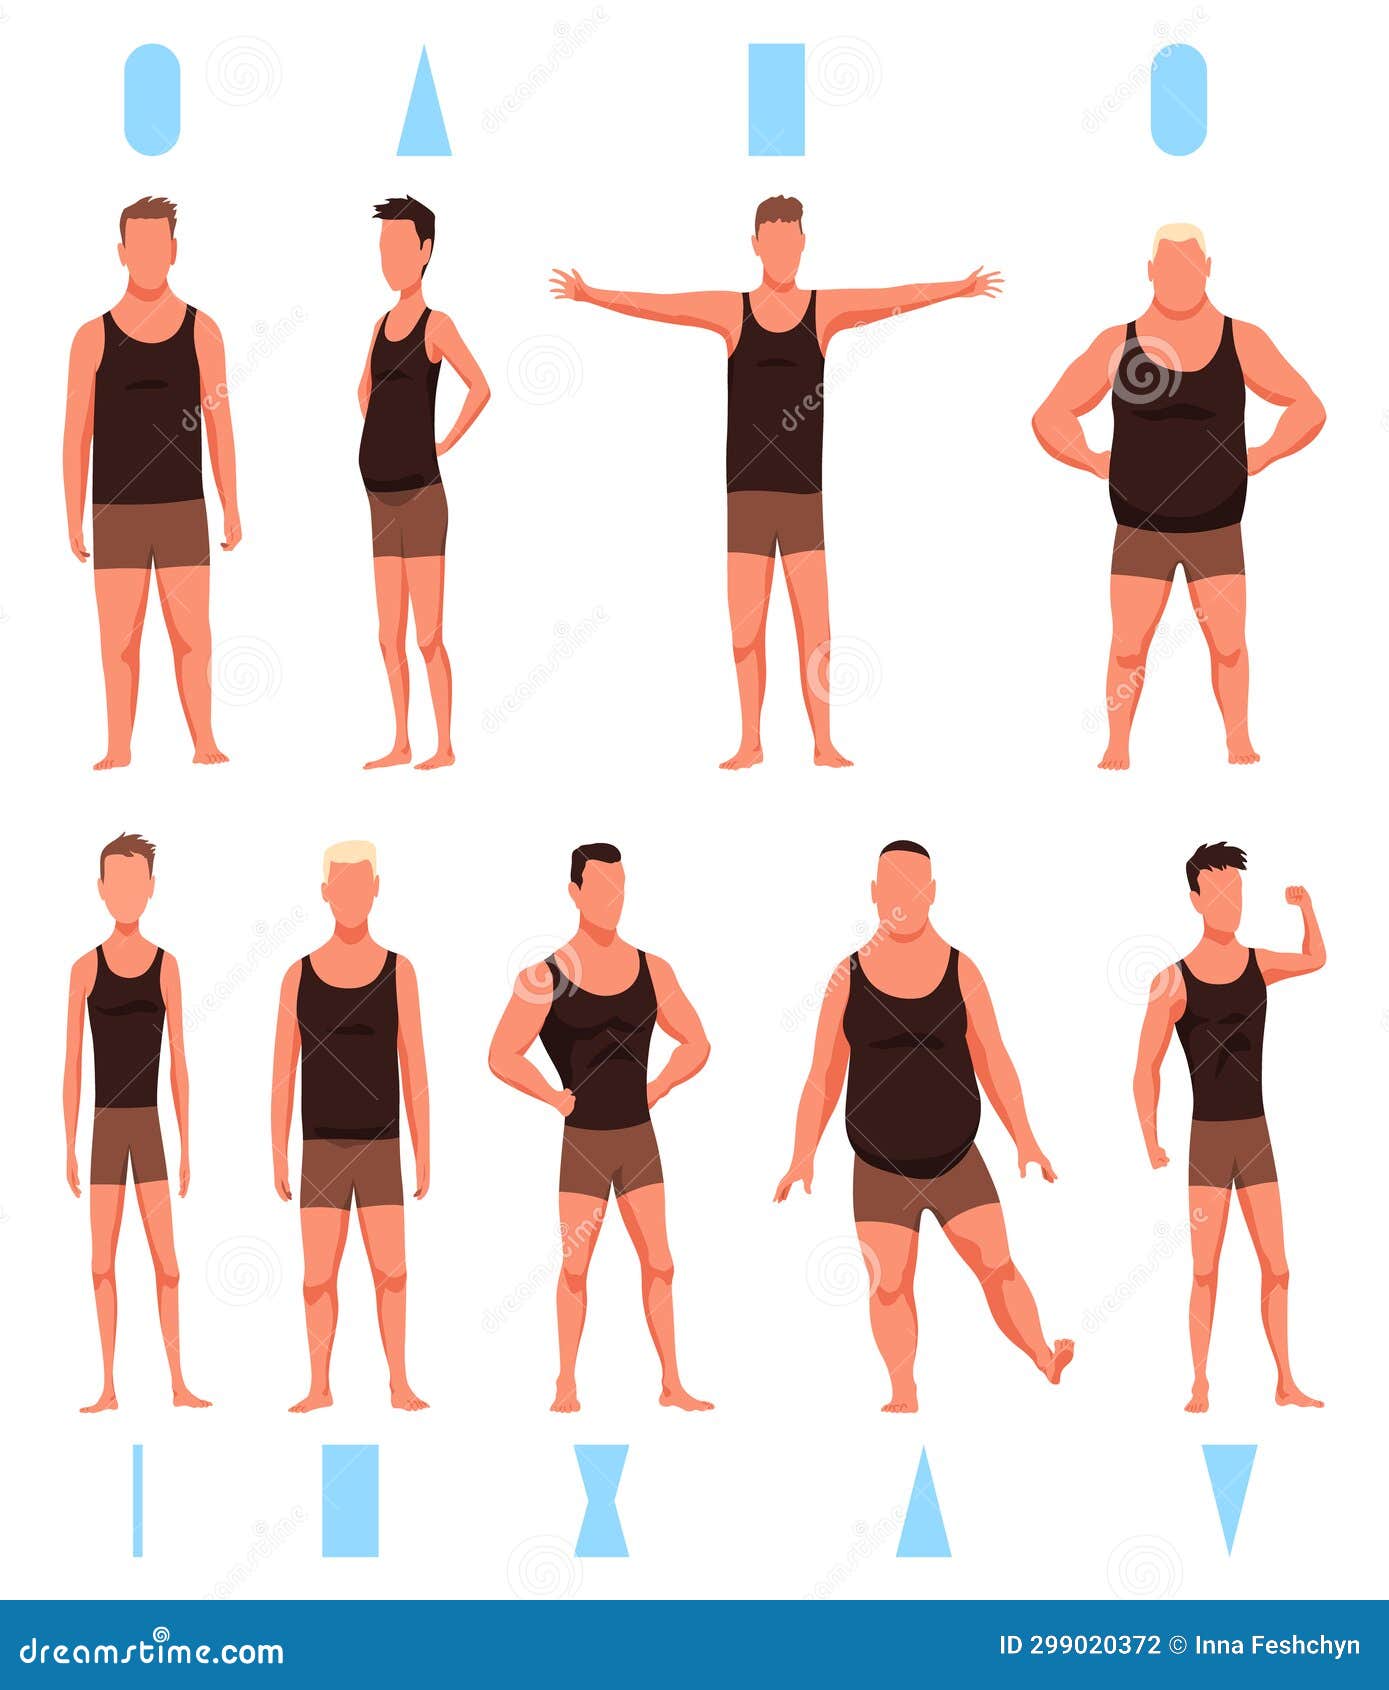 Human body shapes types. Male figures different proportions.